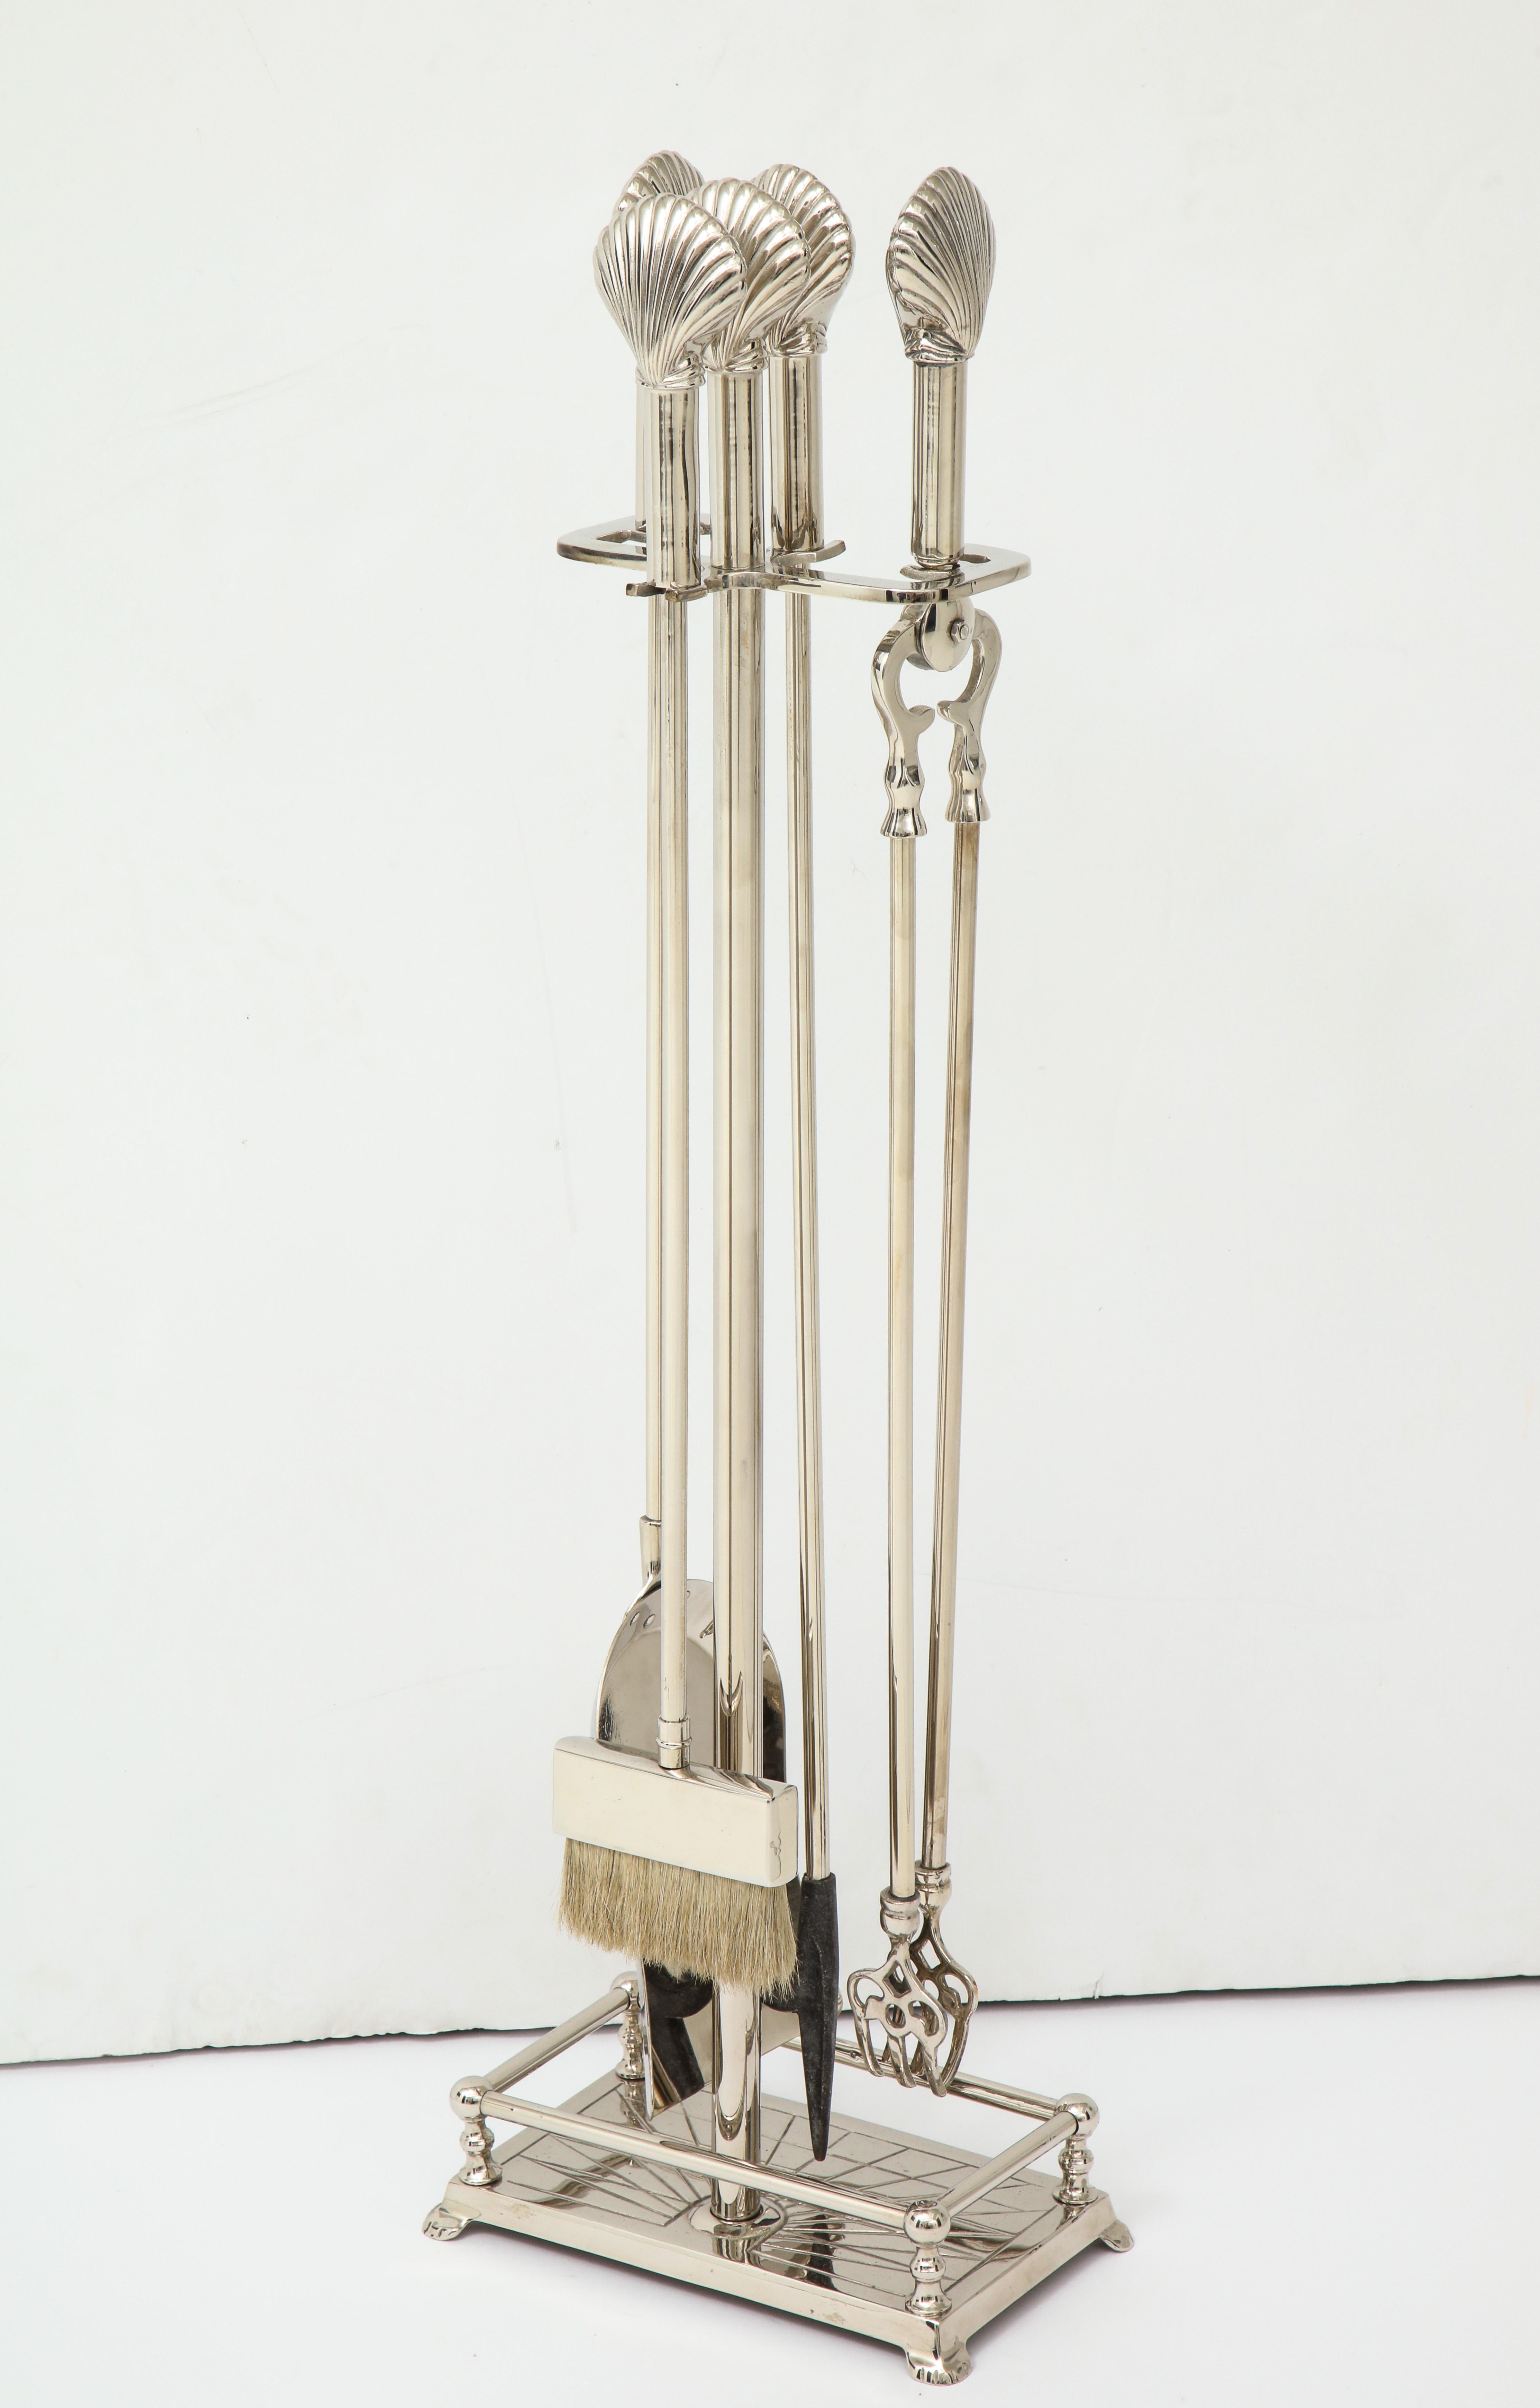 Set of Art Deco fireplace tools with stylized shell finials on tools and stand. Set includes poker, shovel, tongs, broom and Stand, all in polished nickel.